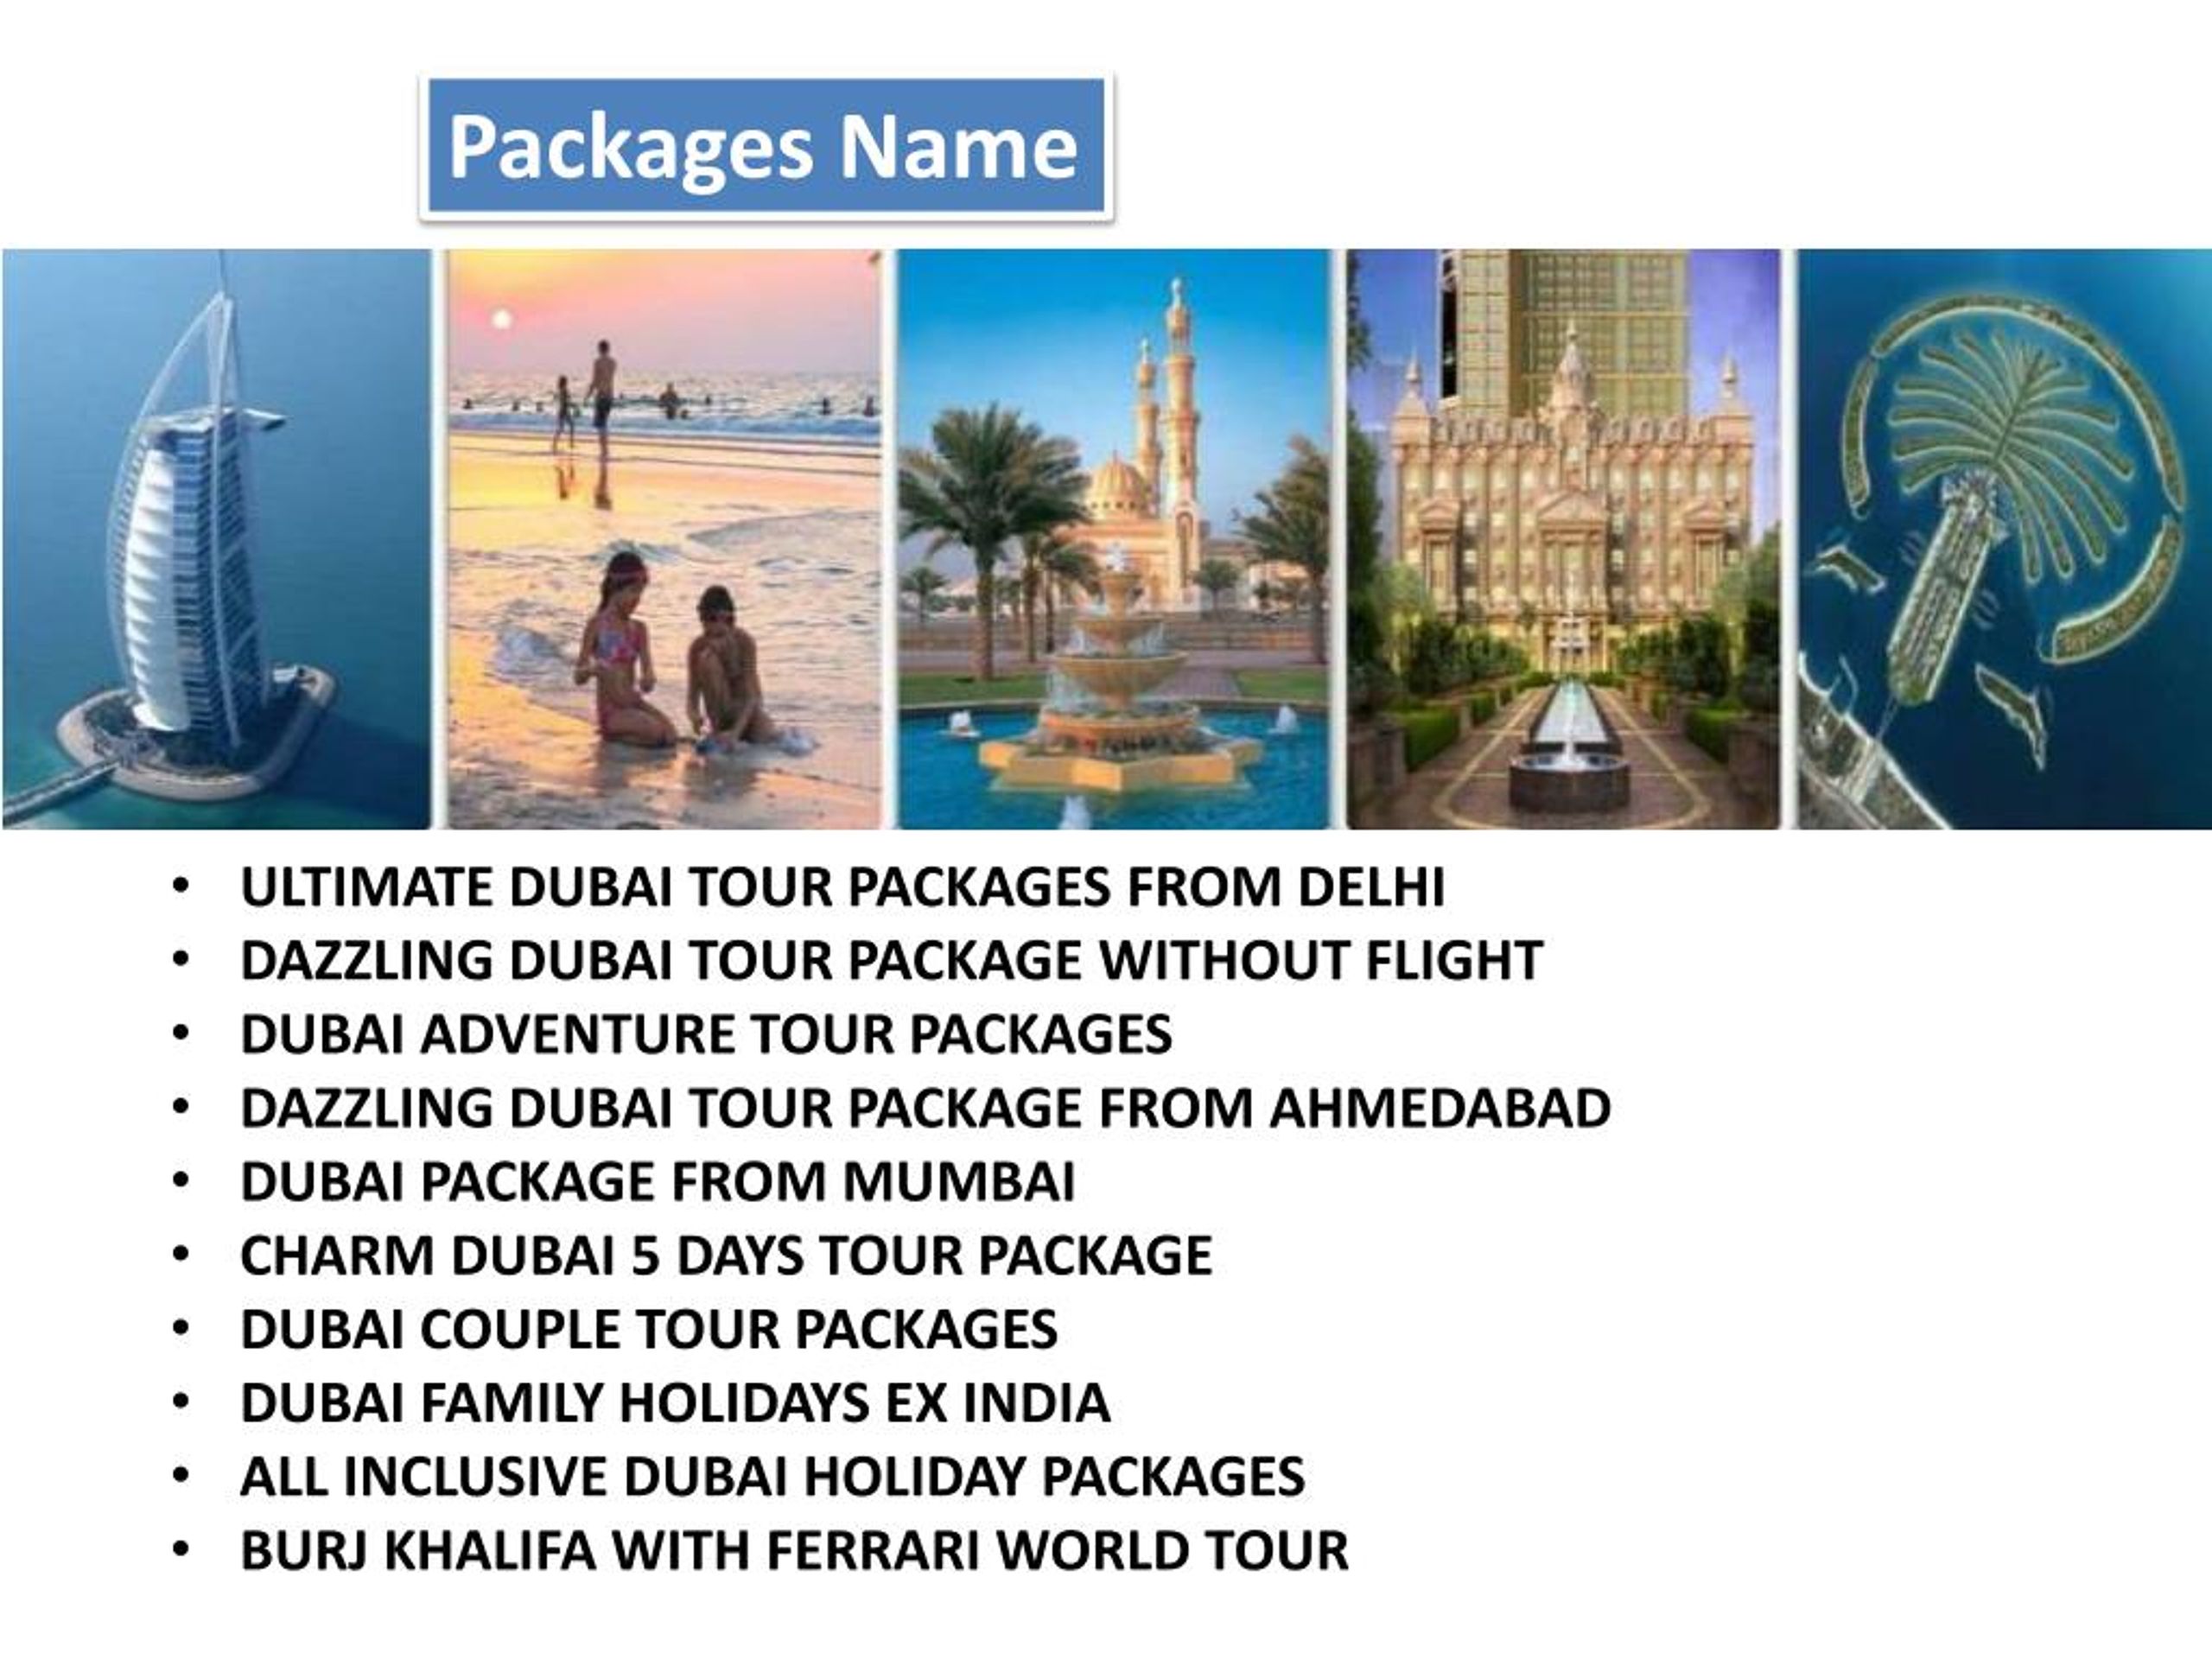 tour packages names